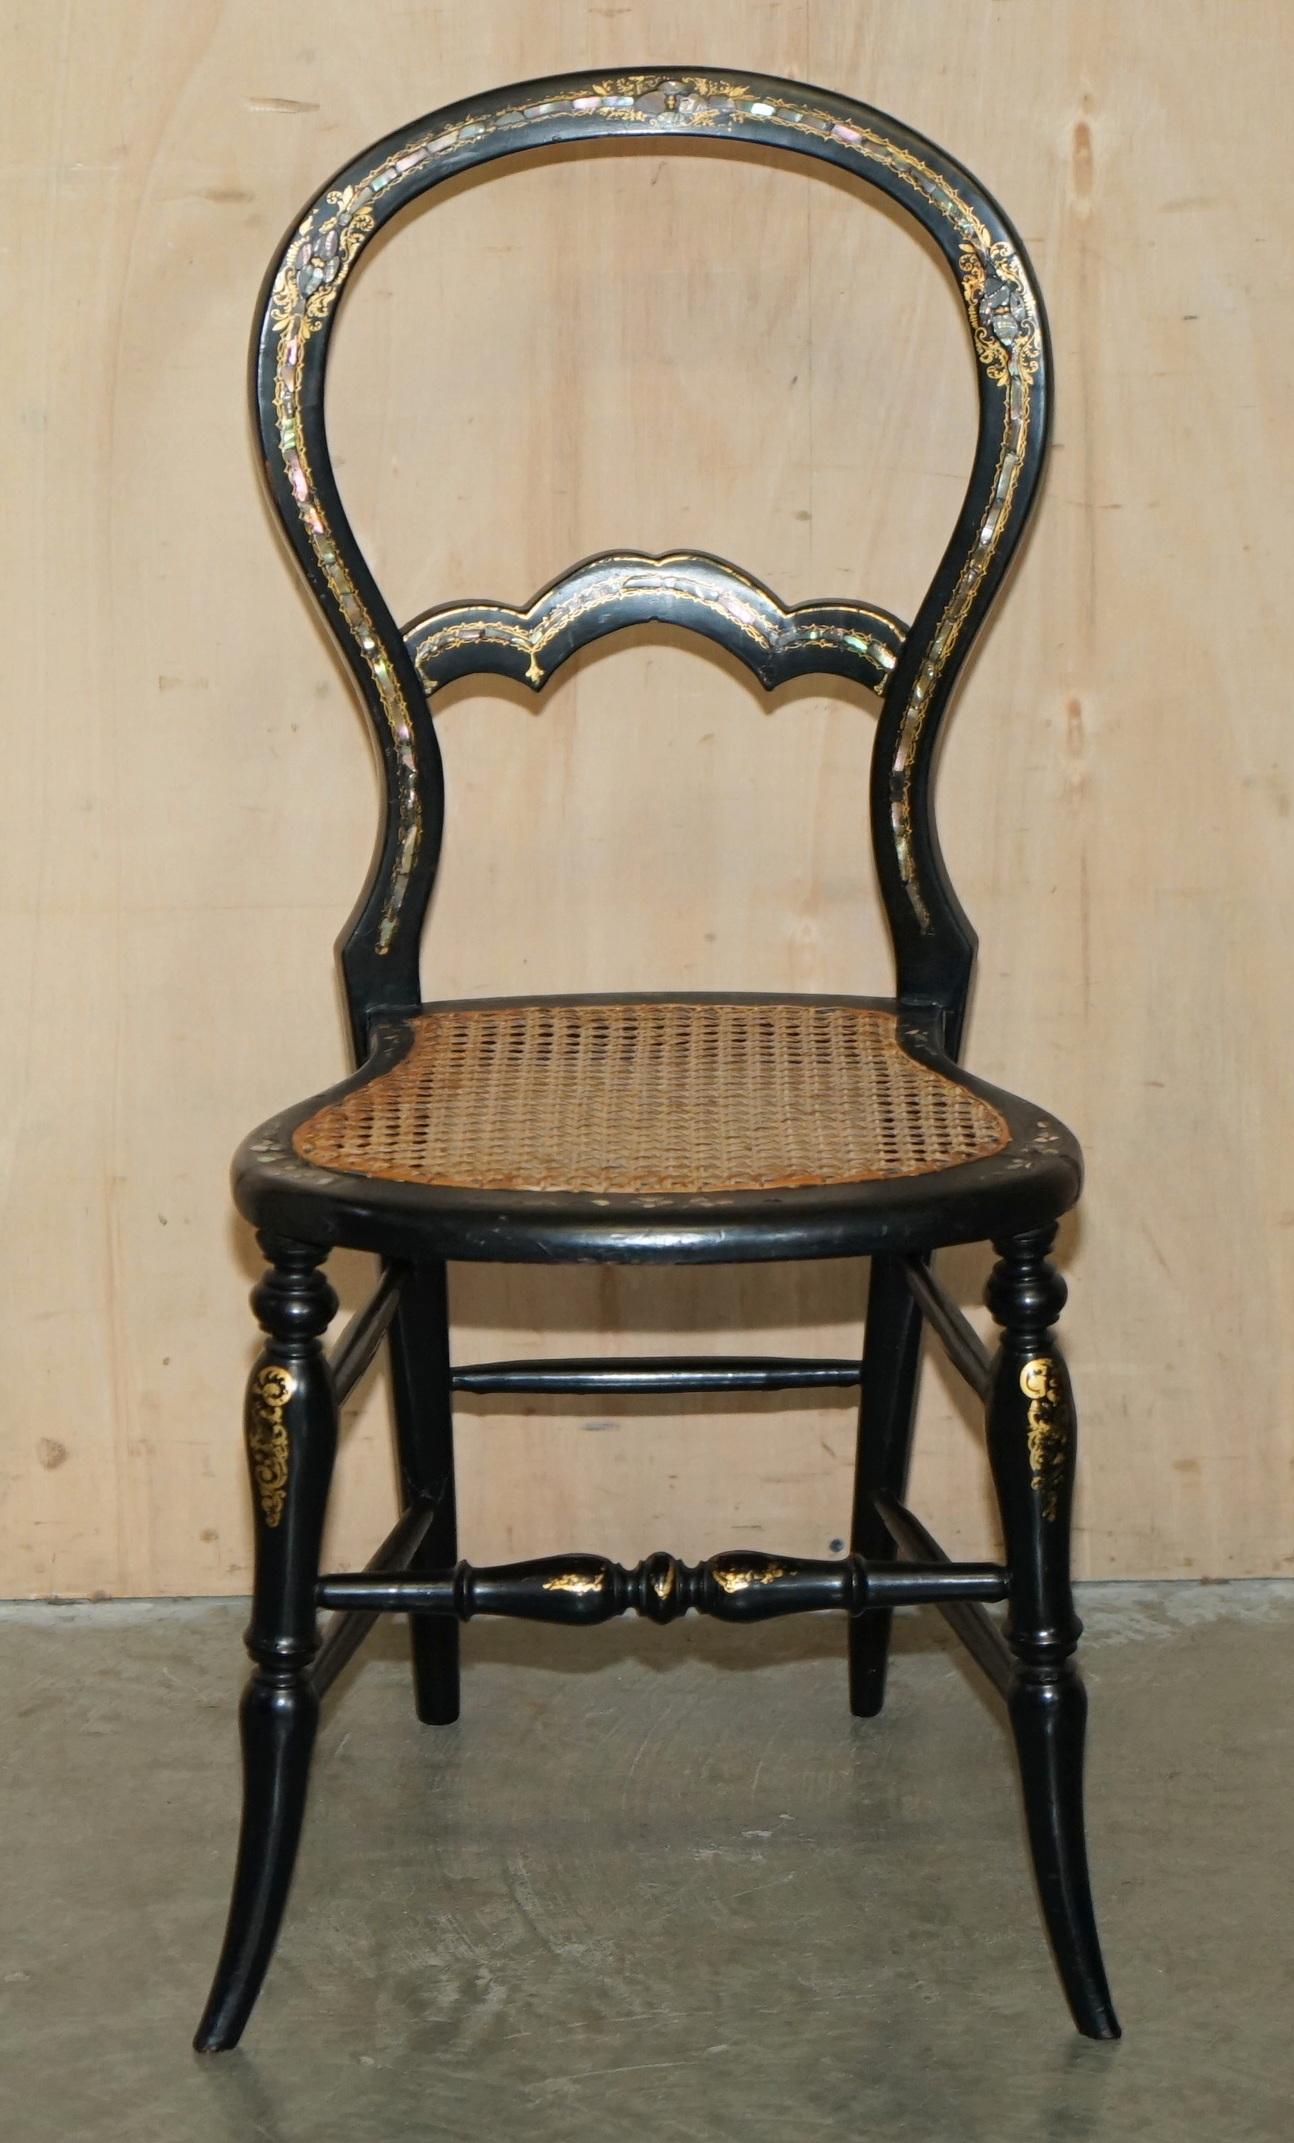 FOUR FINE AND ANTIQUE REGENCY BERGERE MOTHER OF PEARL EBONISED SIDE CHAIRs For Sale 12